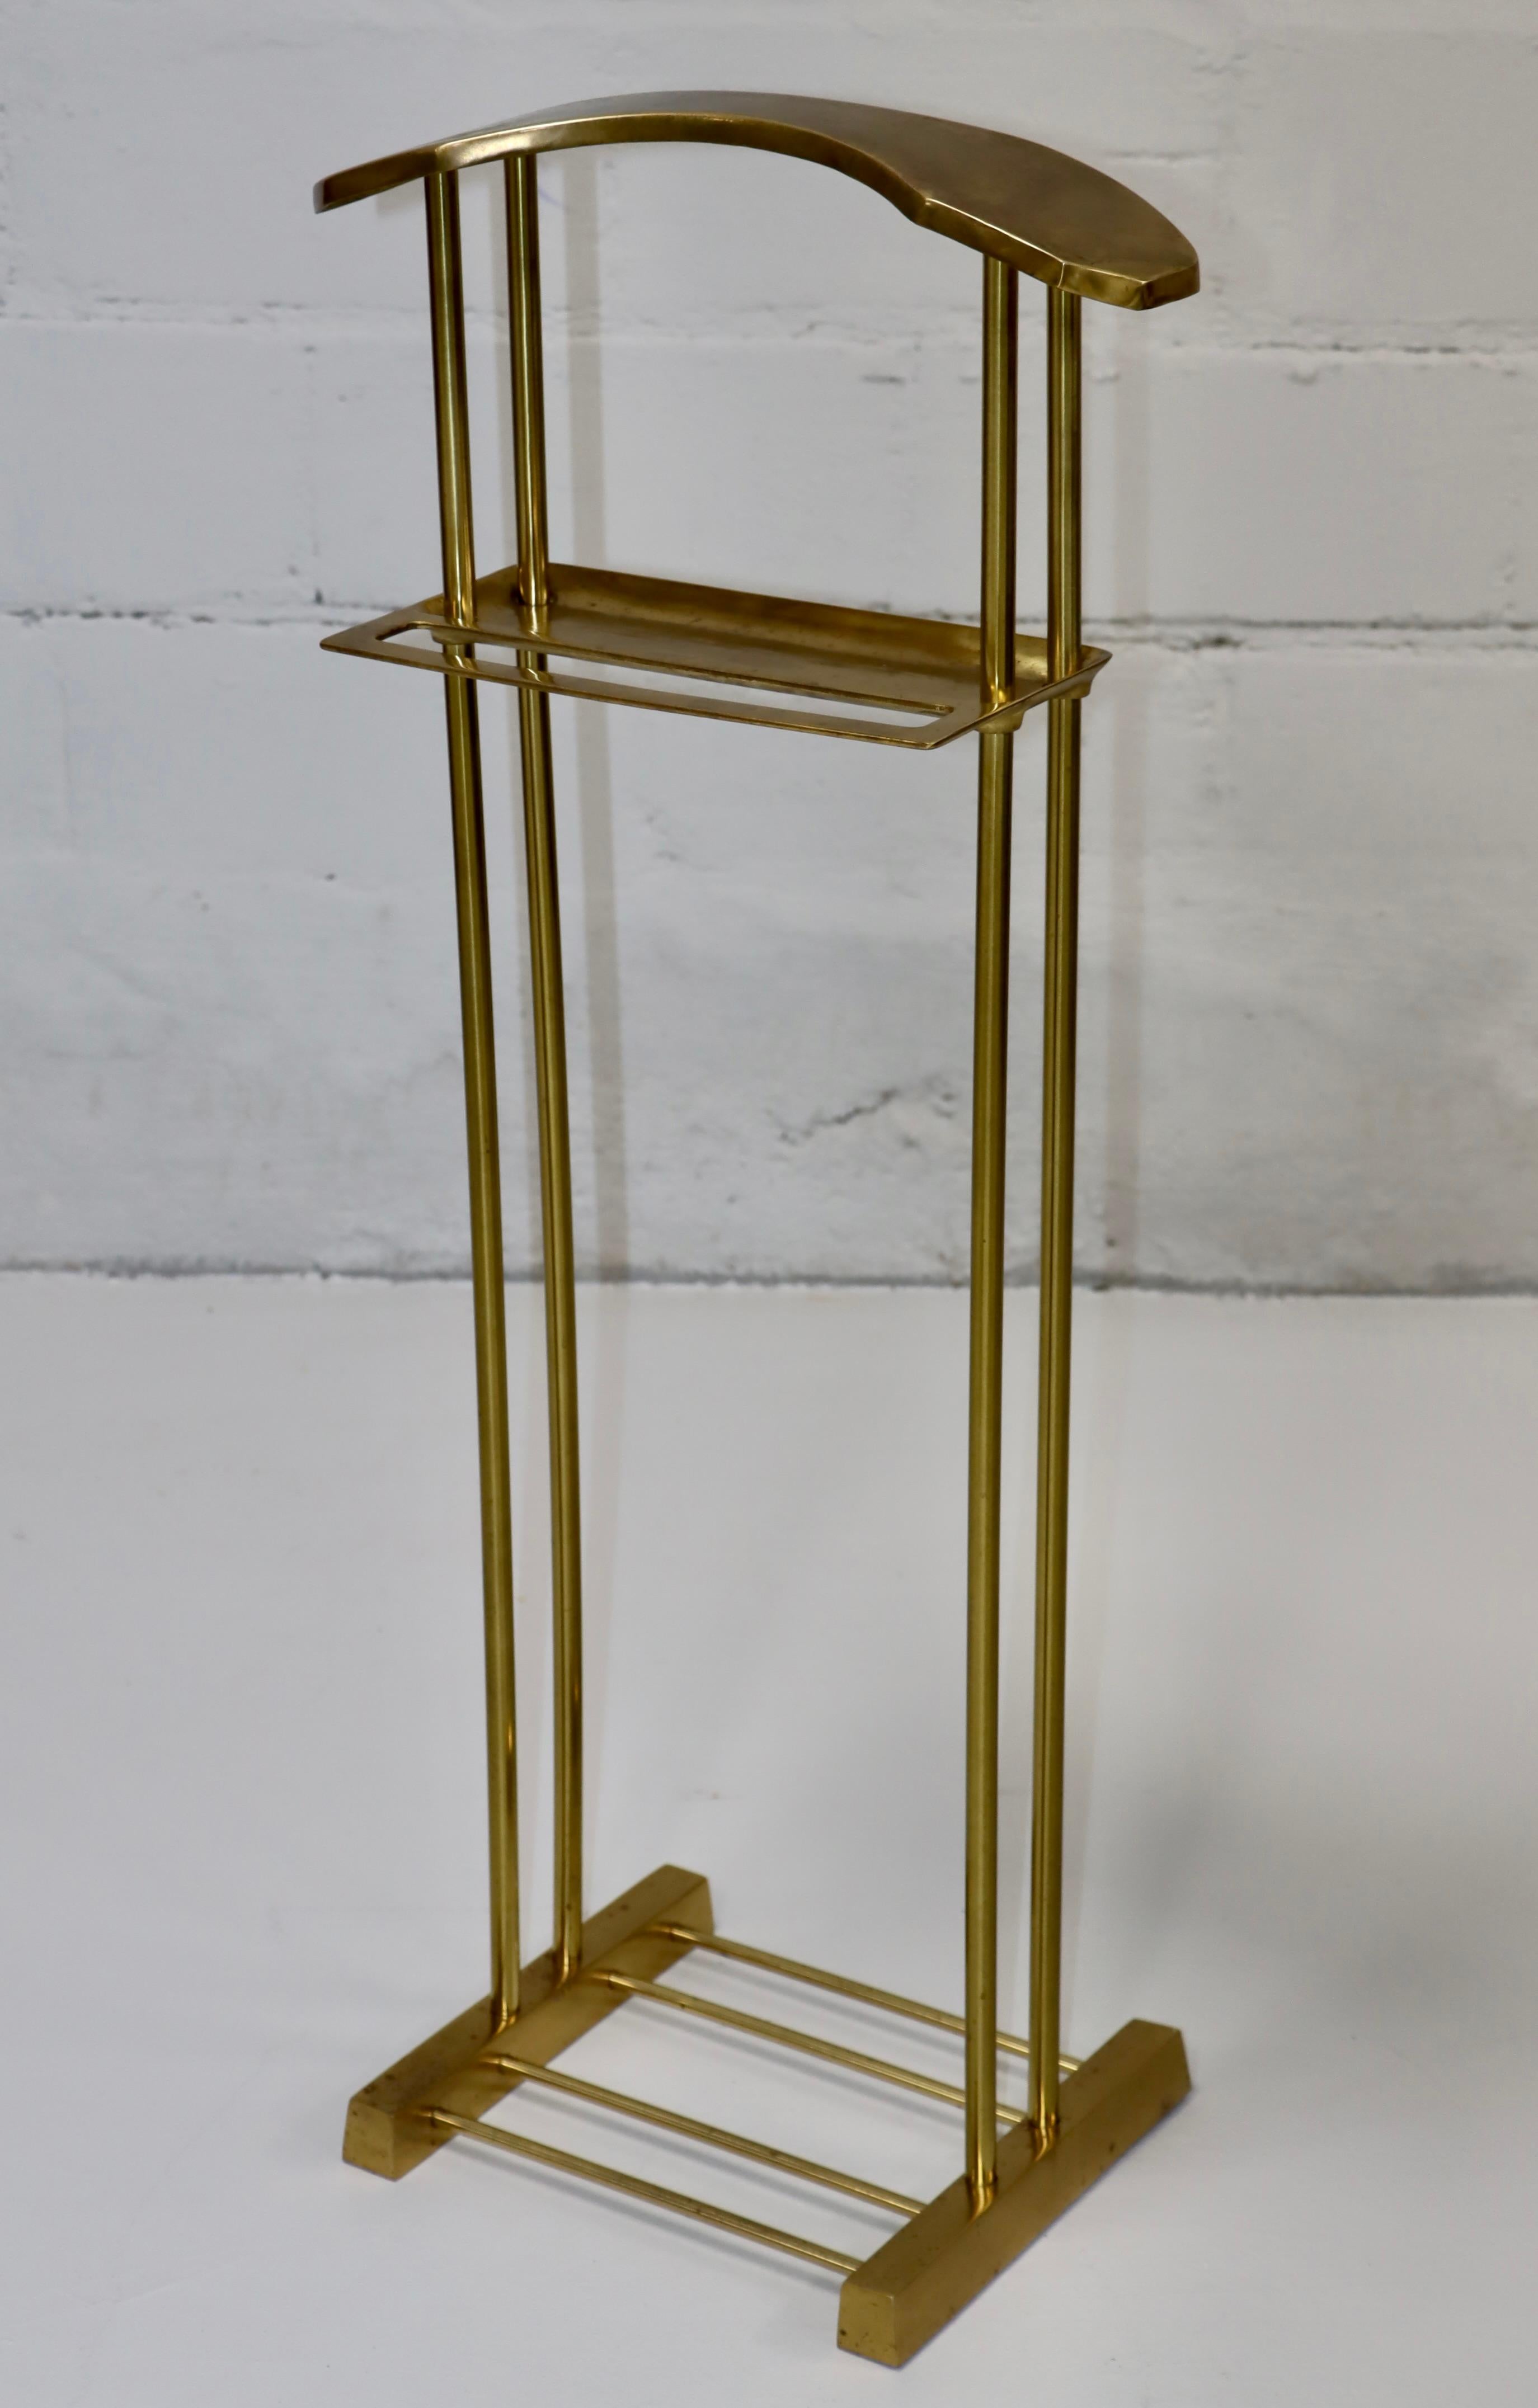 1980's modernist brass valet stand by Decorative Crafts Inc. In vintage original condition with some wear and patina to the brass.